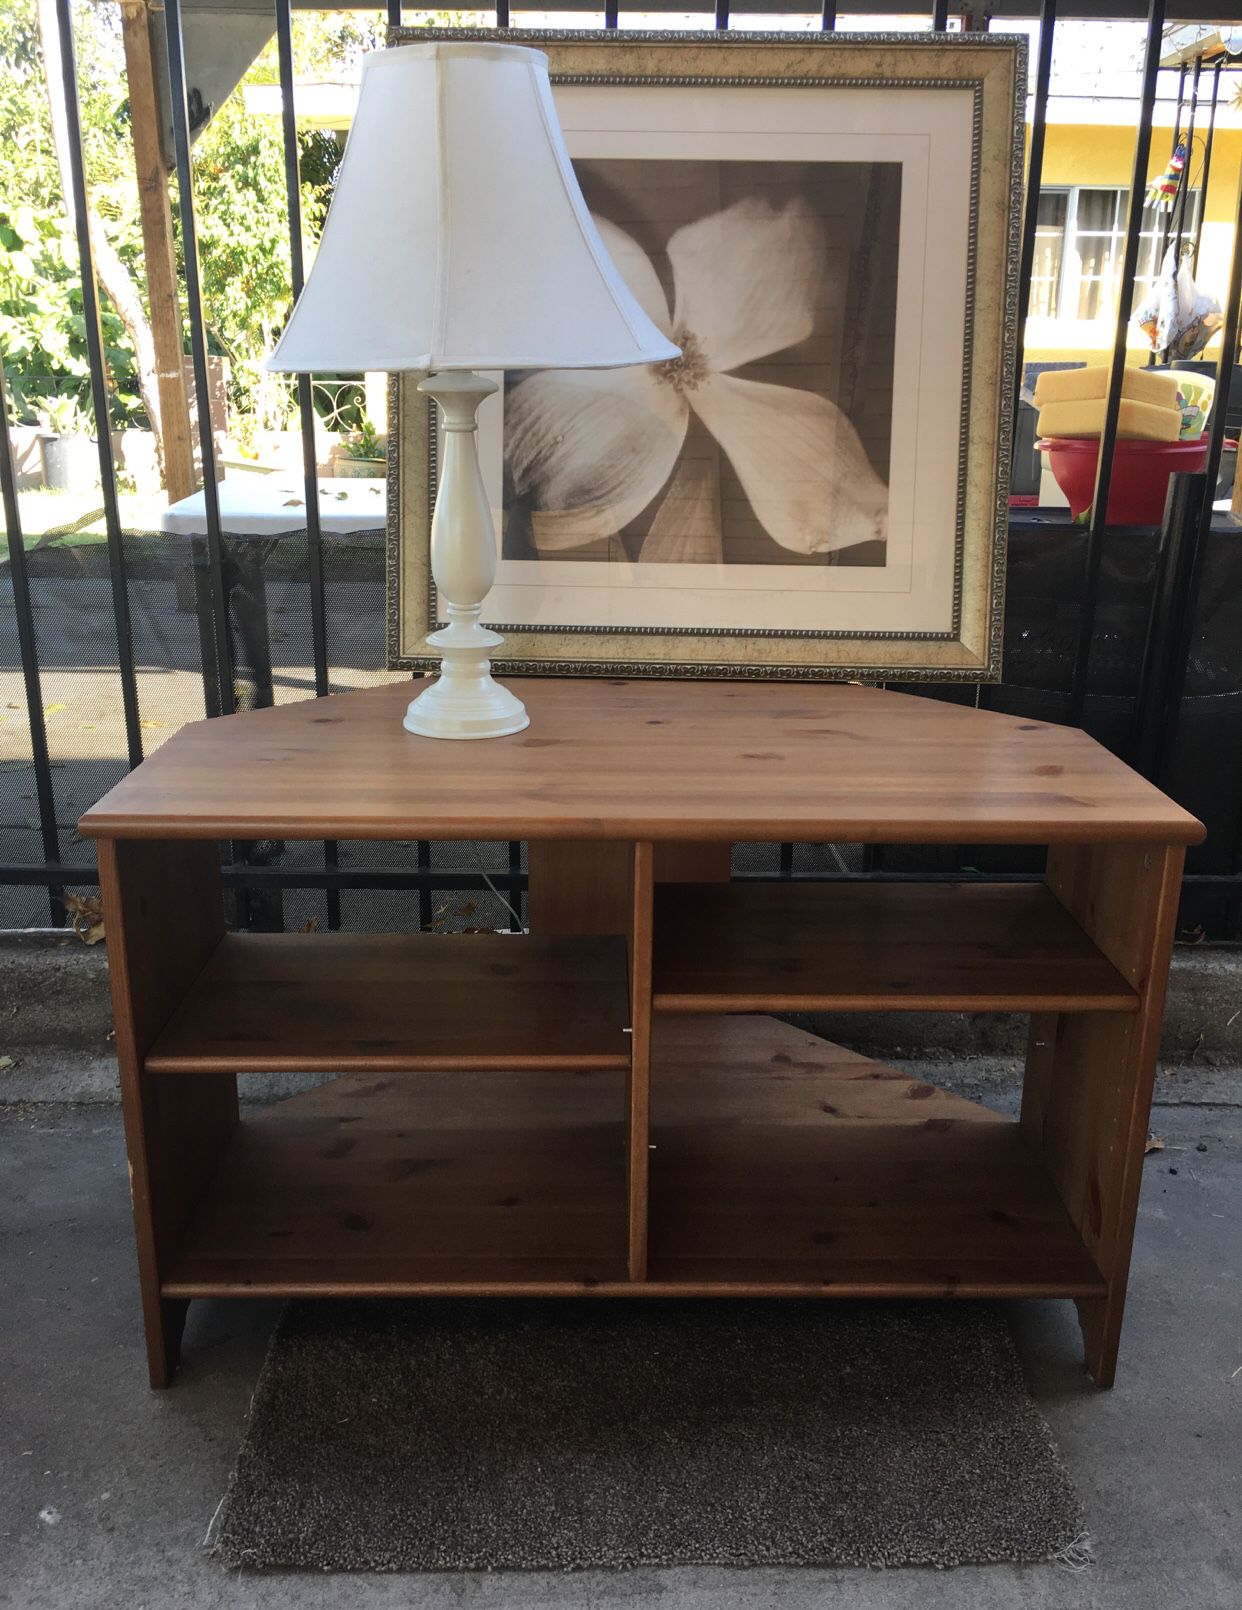 GREAT CONDITION LIVING ROOM TV STAND SHELF TABLE ENTERTAINMENT CENTER WITH LAMP GREAT FOR SMALL APARTMENT OR BEDROOM